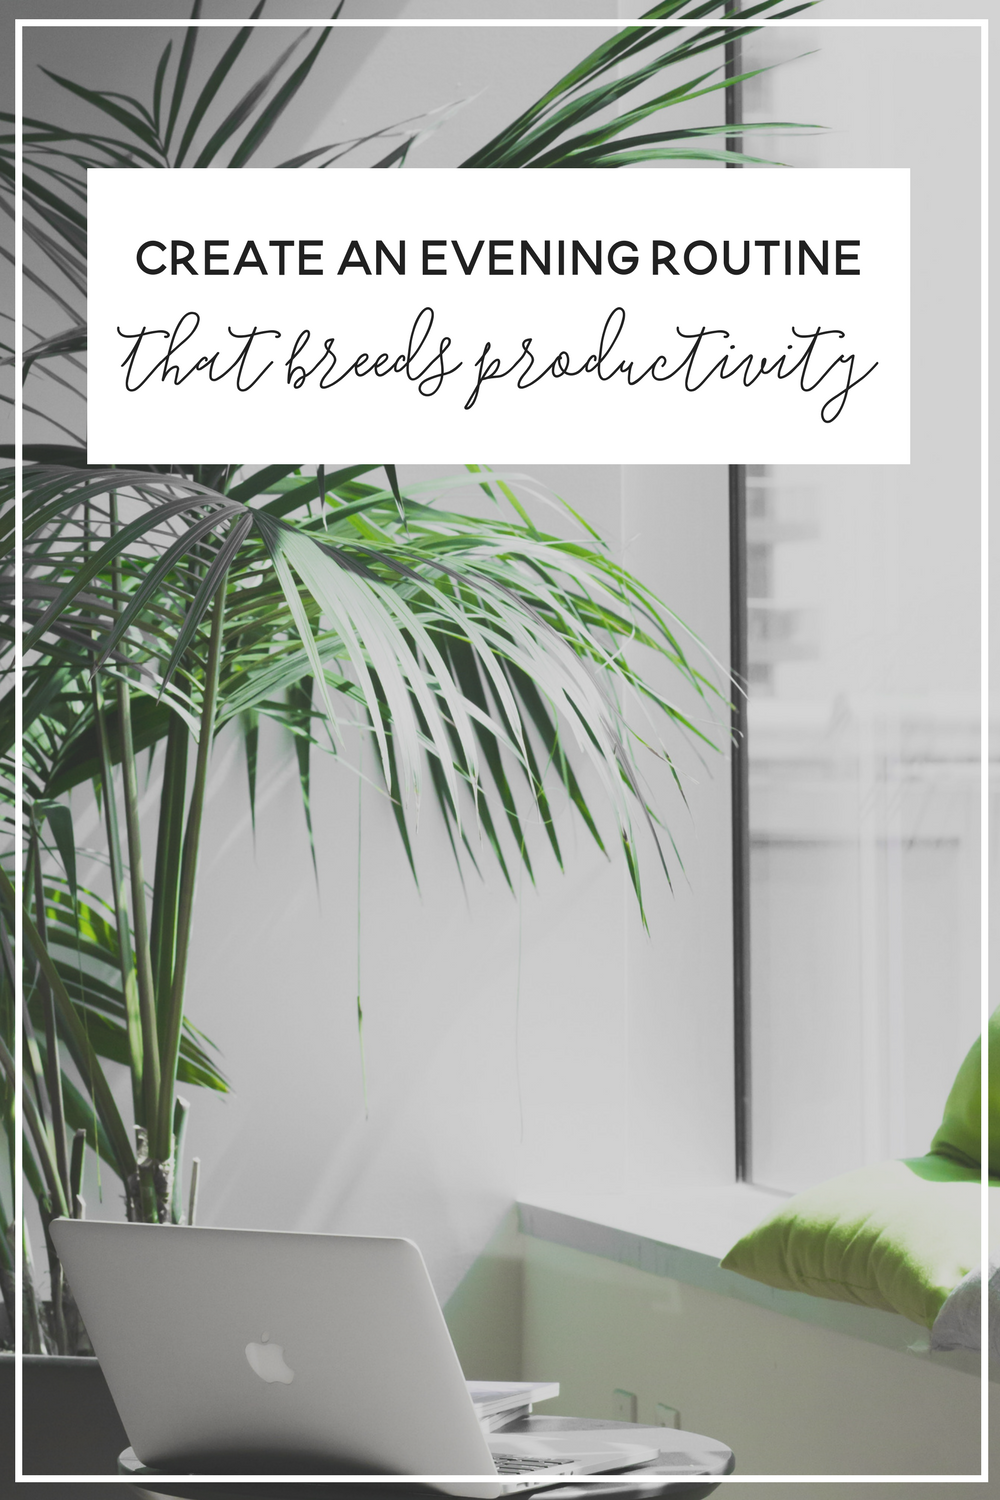 How to Create an Evening Routine that Makes you More Productive